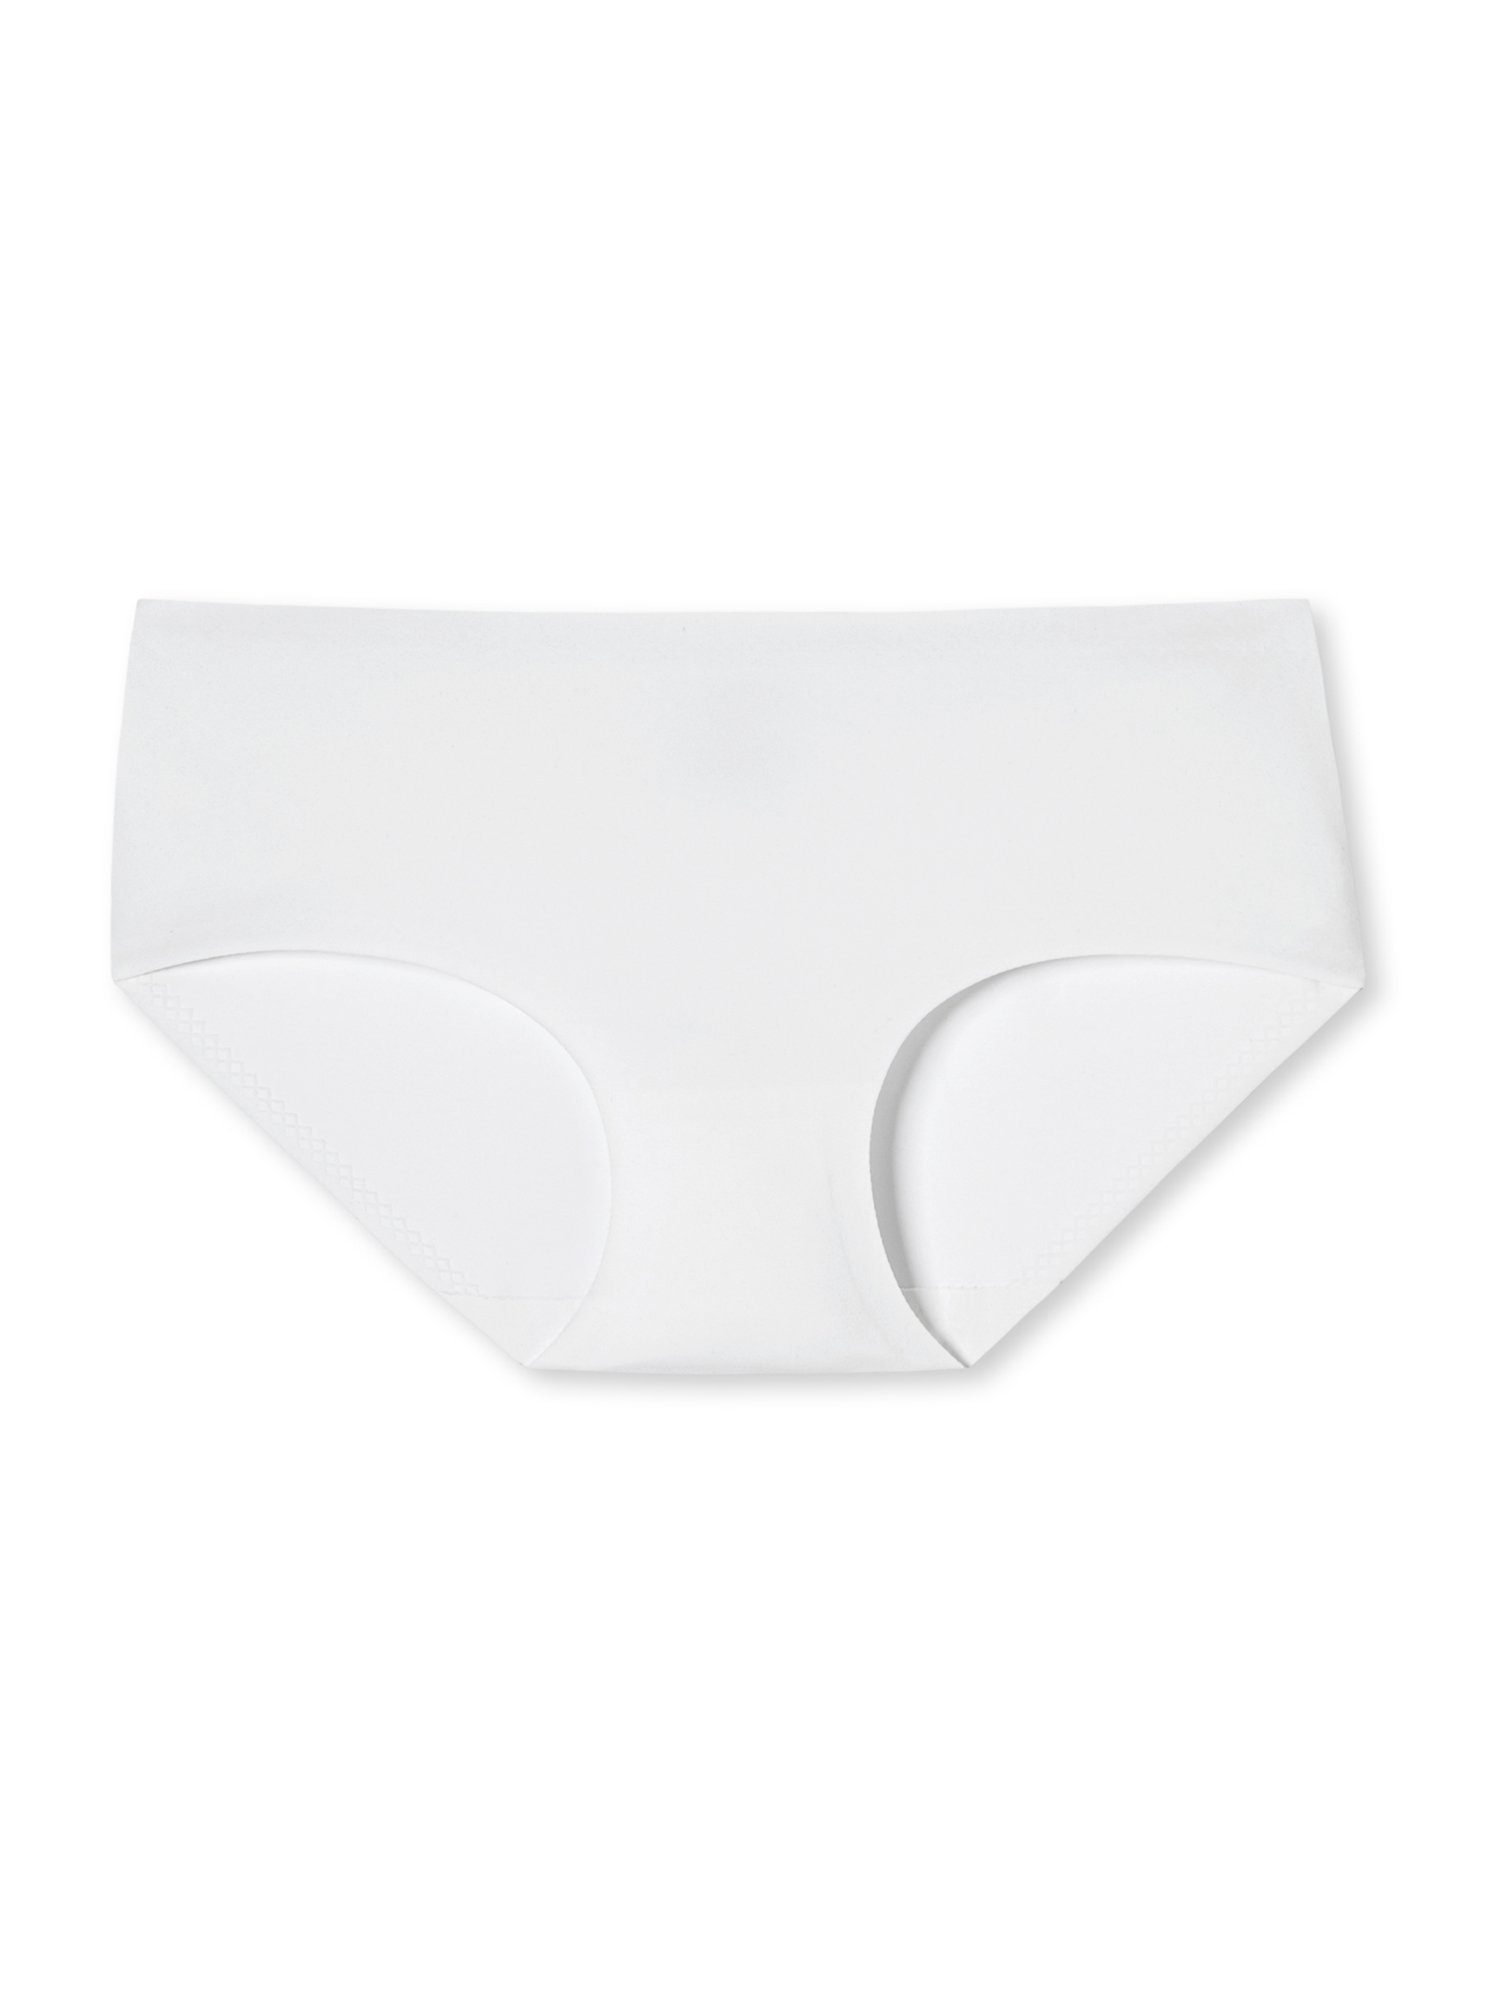 Soft Panty Schiesser weiss Invisible